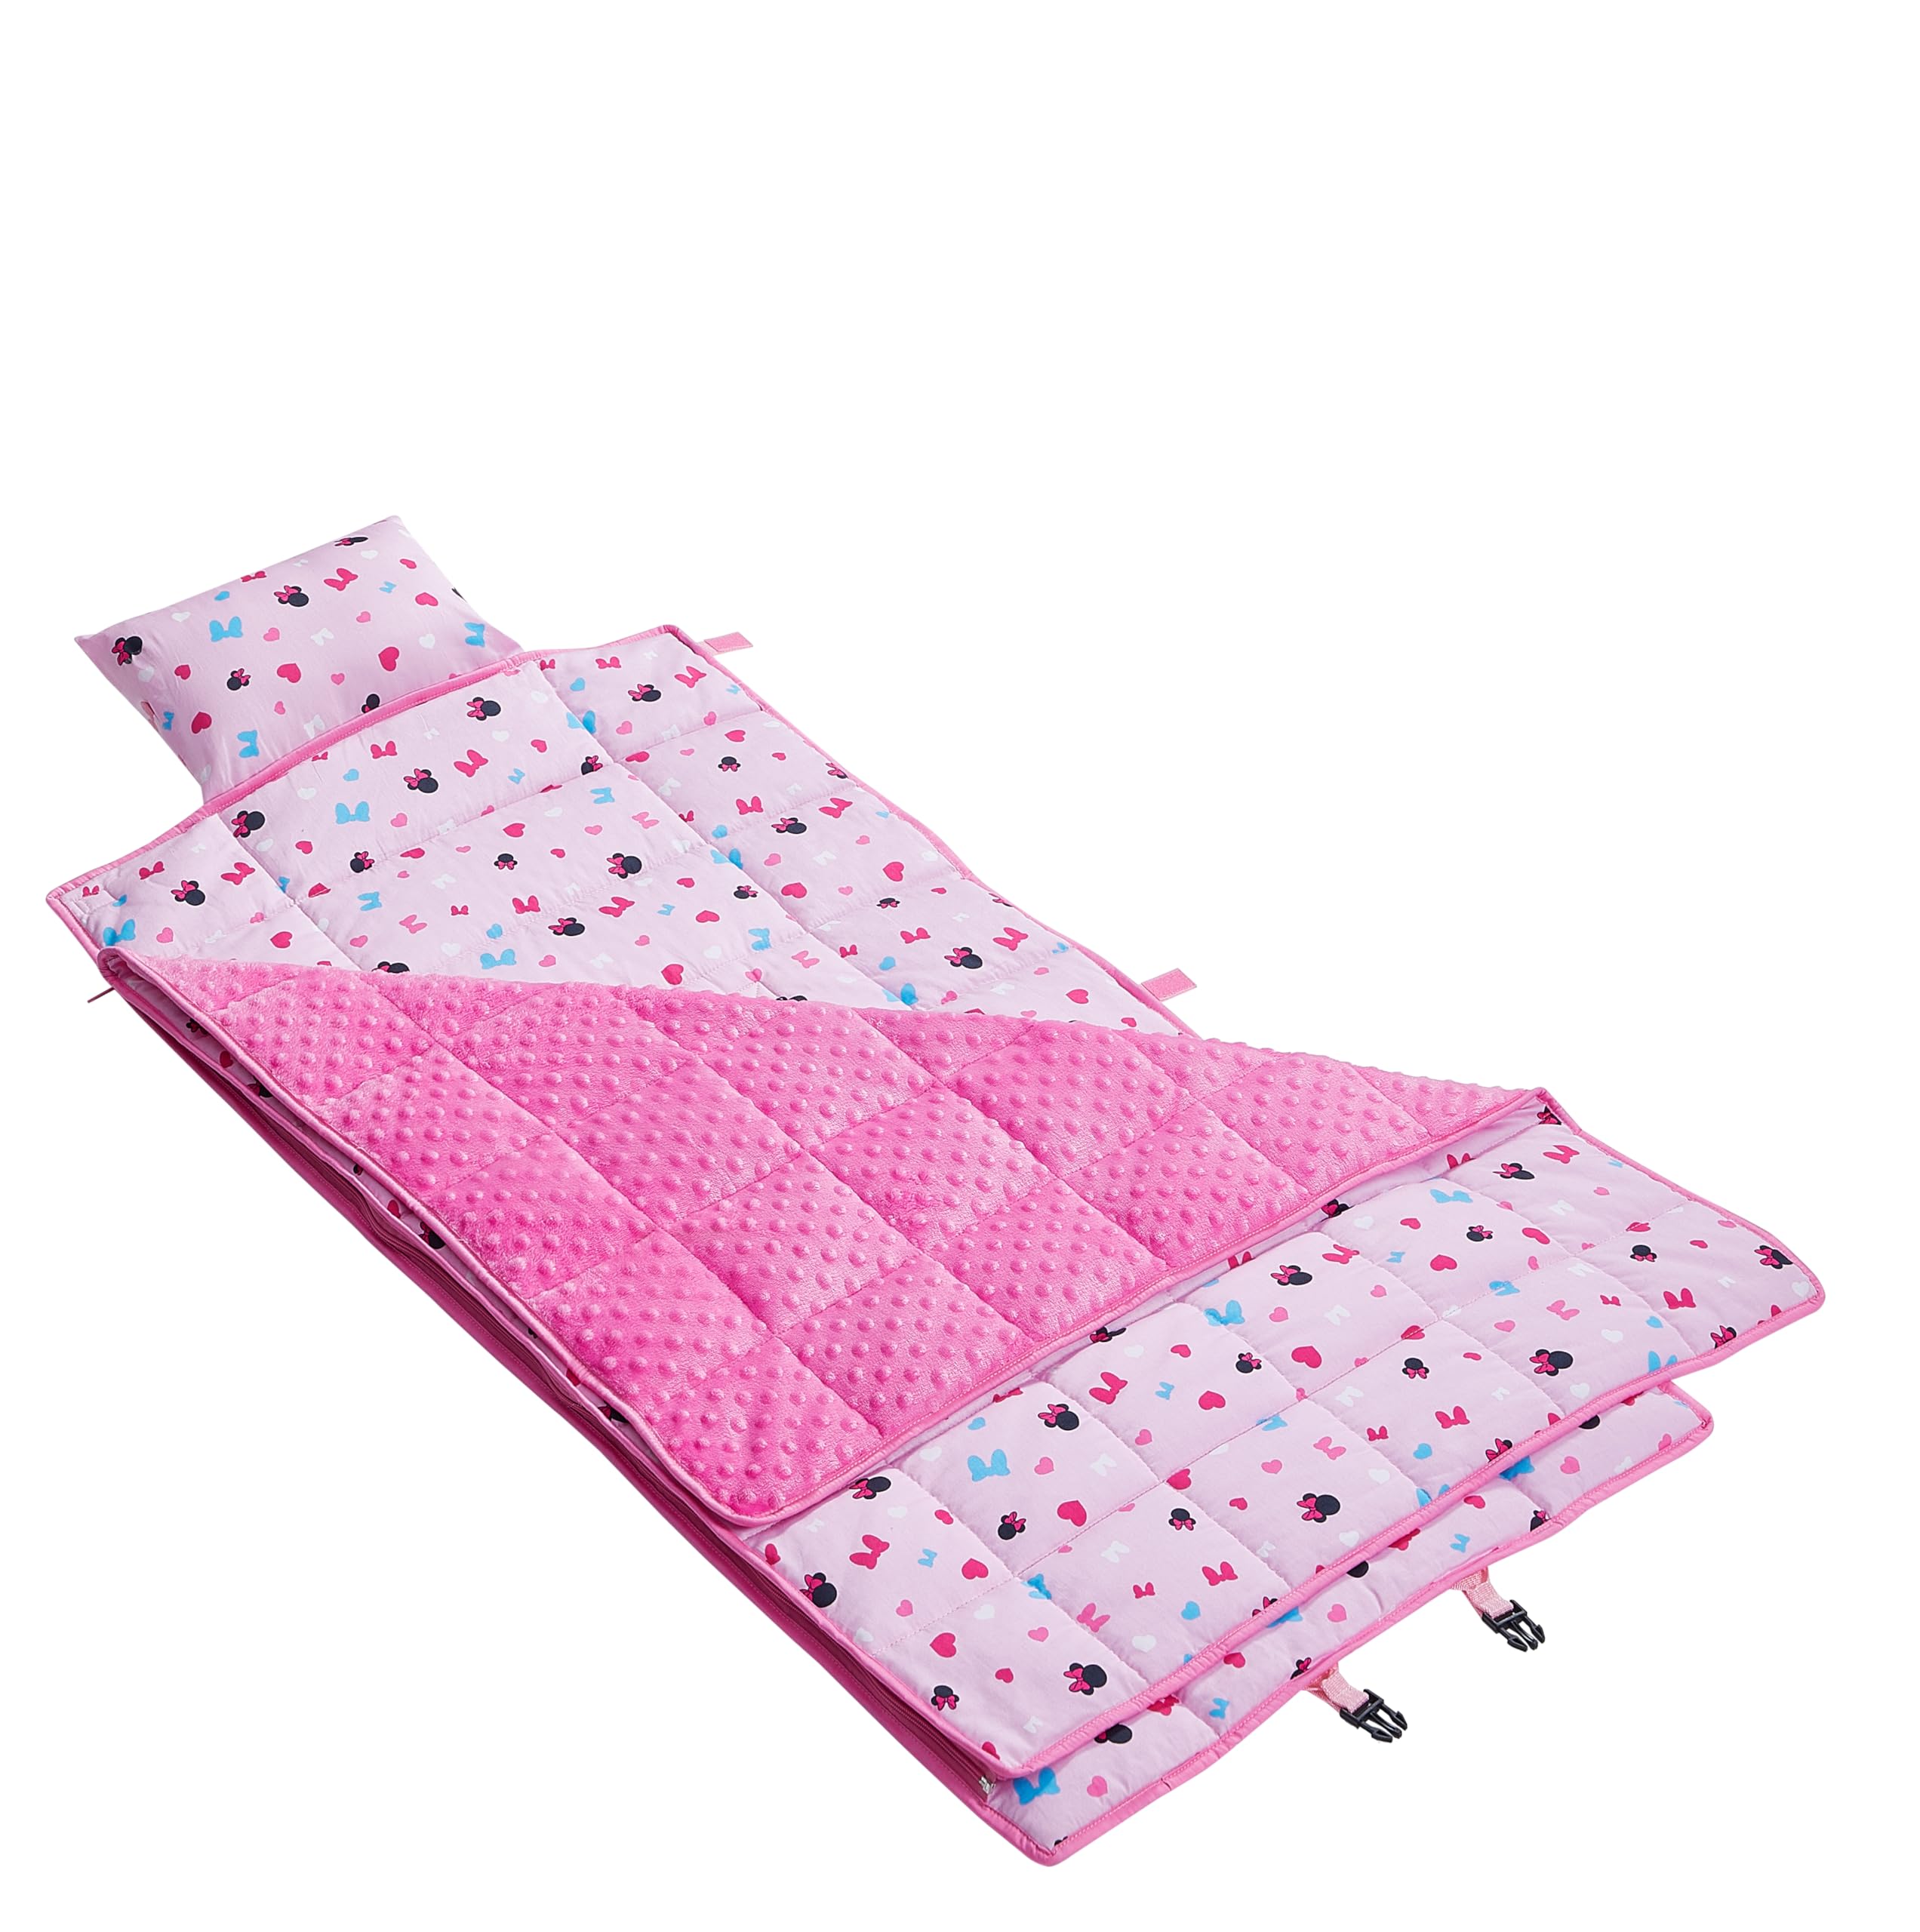 Disney Minnie Mouse 3-in-1 Travel Slumber Nap Mat with Built in Pillow, Plush Blanket and Carry Backpack Straps, 46